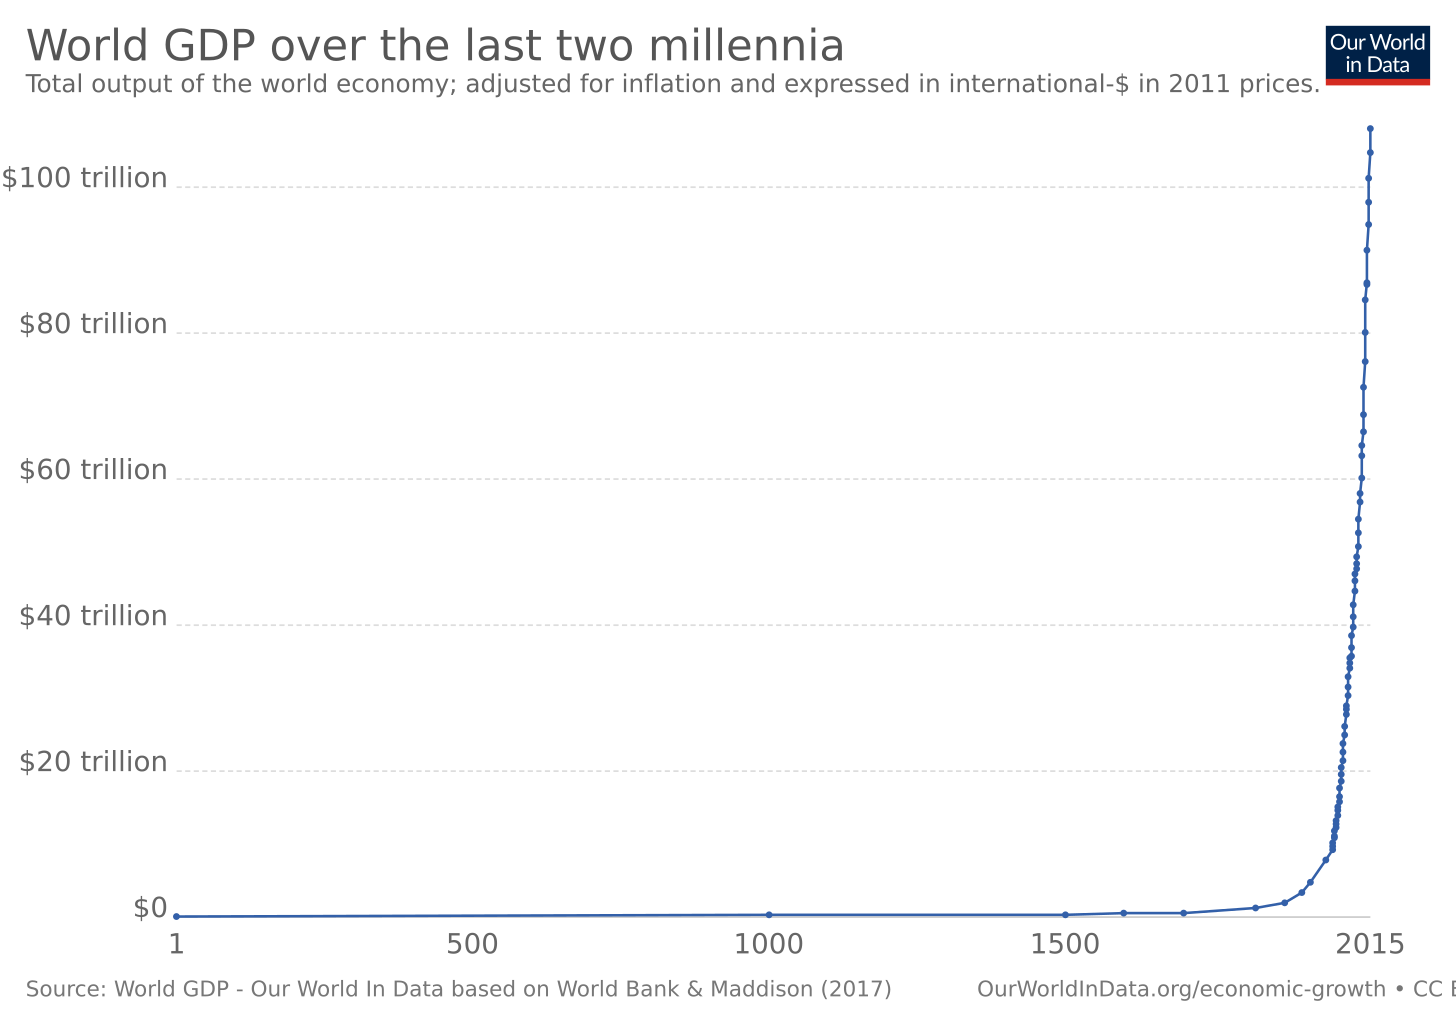 World GDP over the last two millennia - Our World in Data